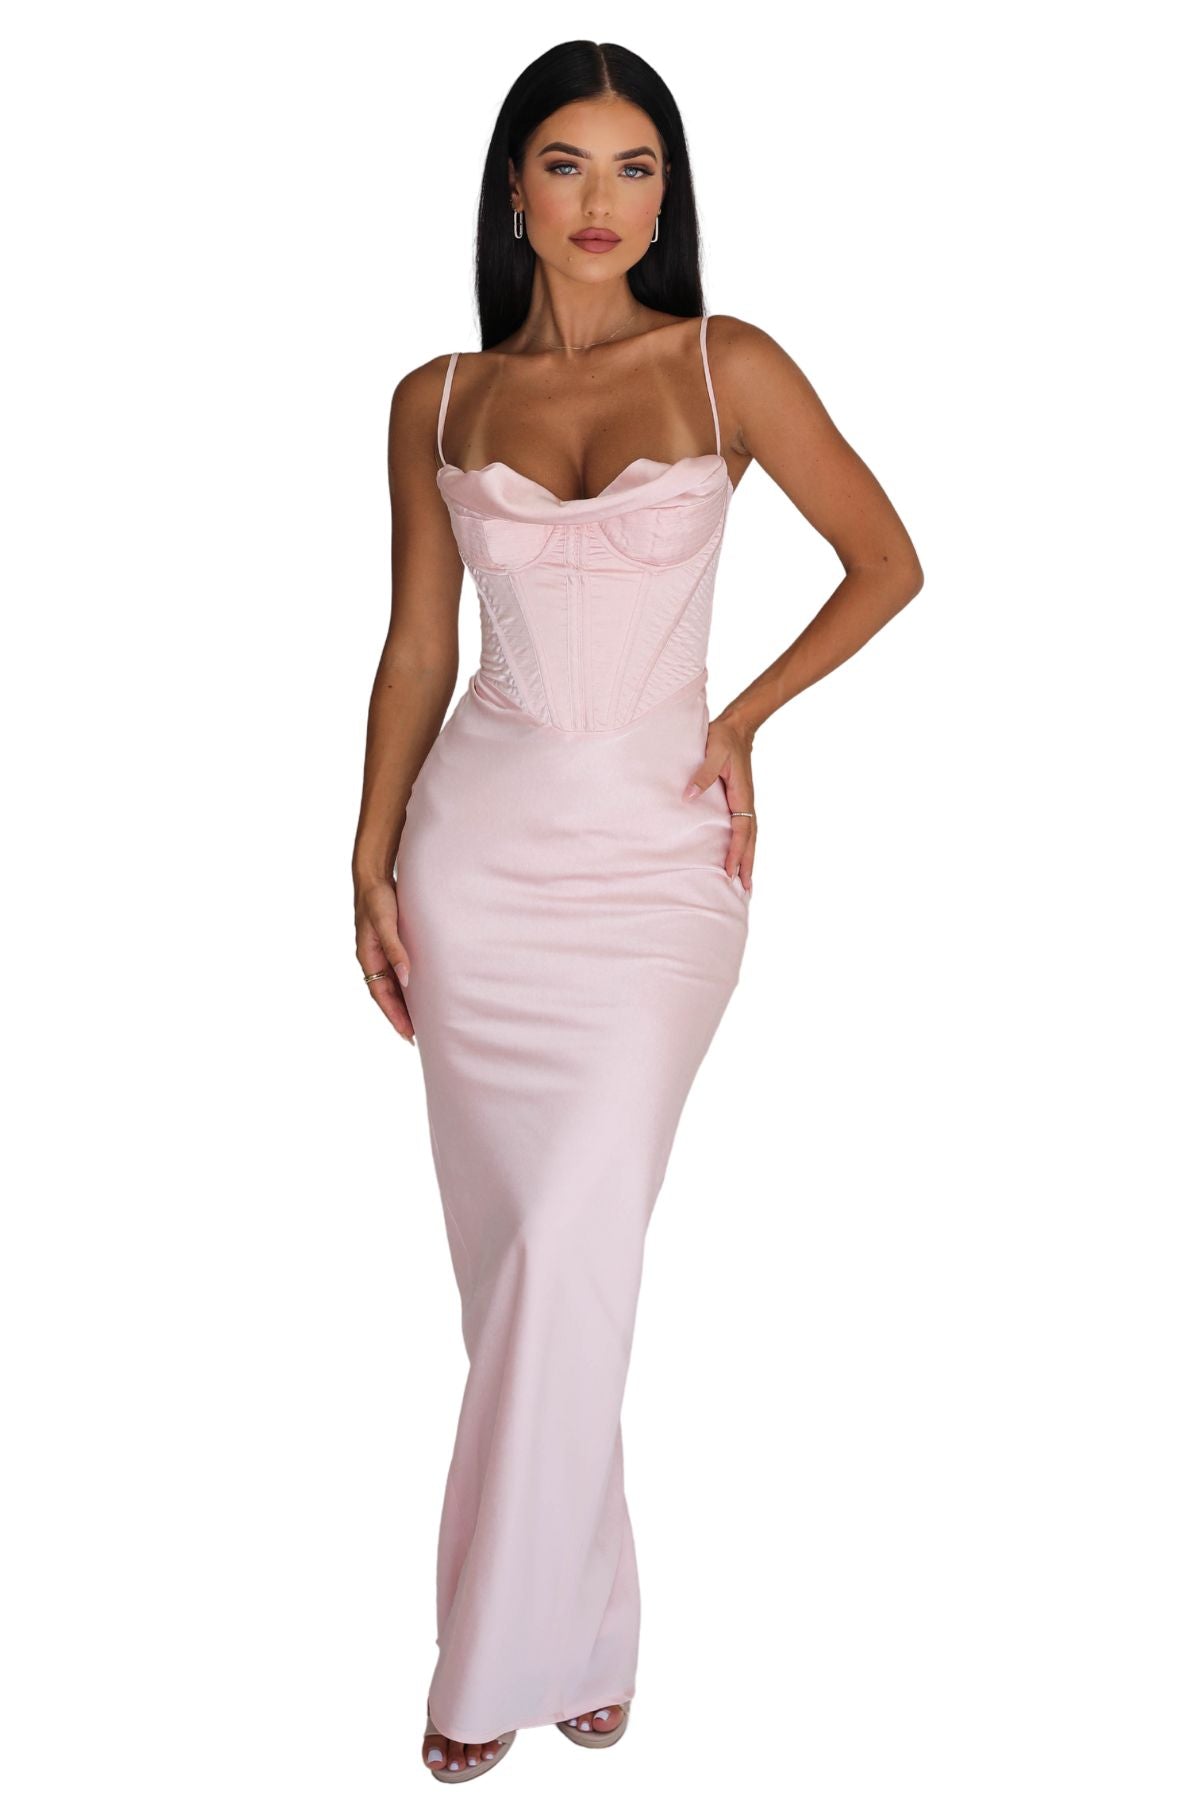 House of CB HOUSE OF CB Charmaine Corset Gown (Blush Pink) - RRP $389 - 1_1a56f437-ad4f-4429-8b35-aec7ad41af97.jpg